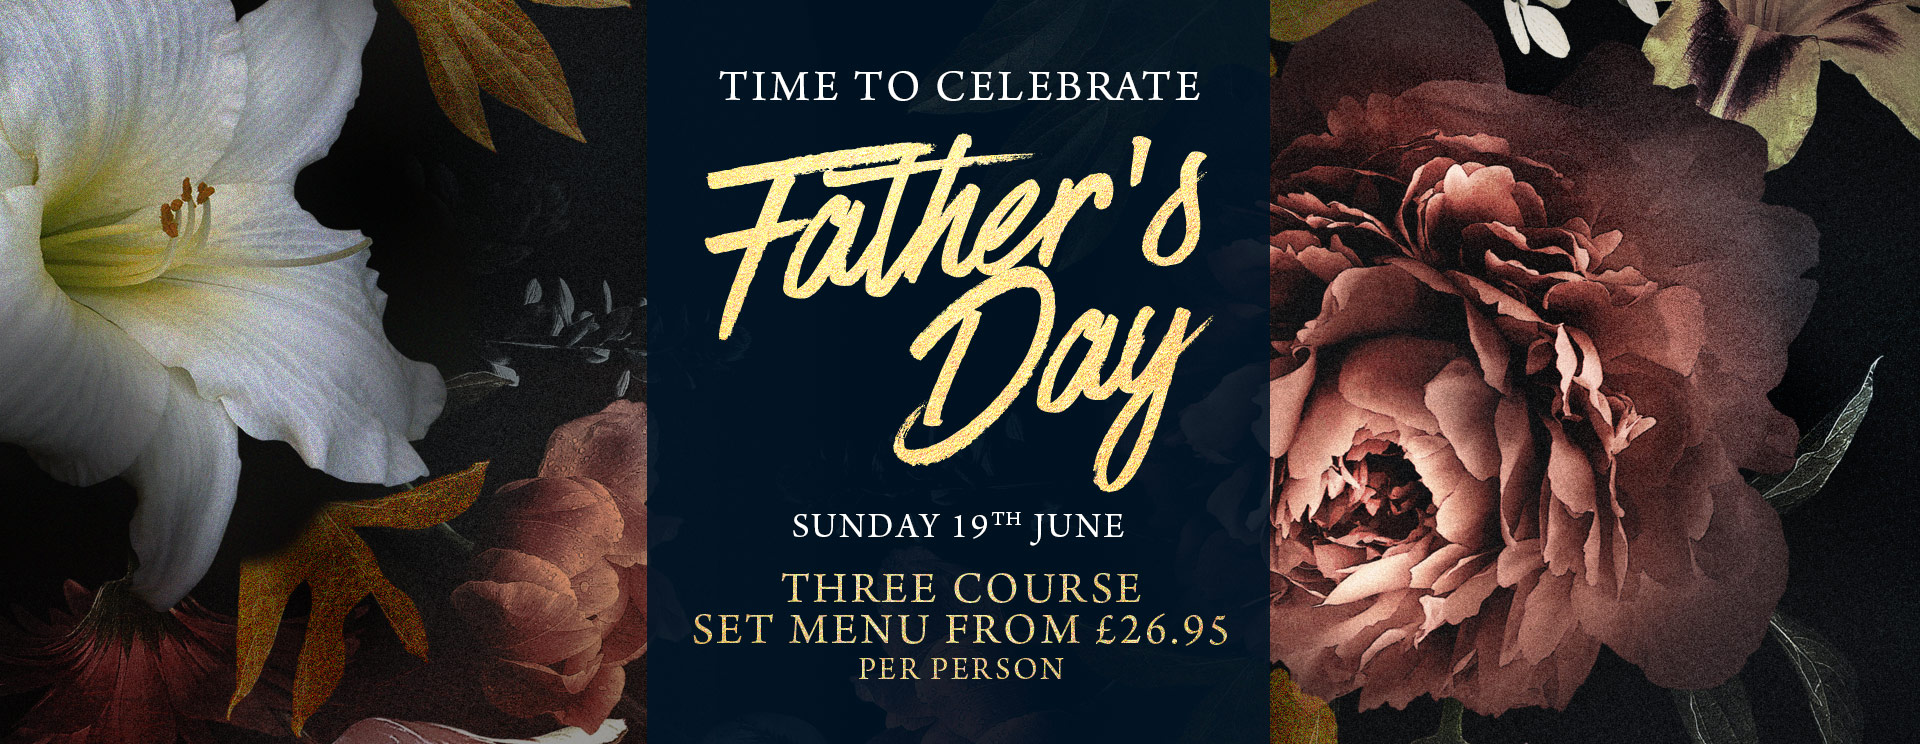 Fathers Day at The St George & Dragon